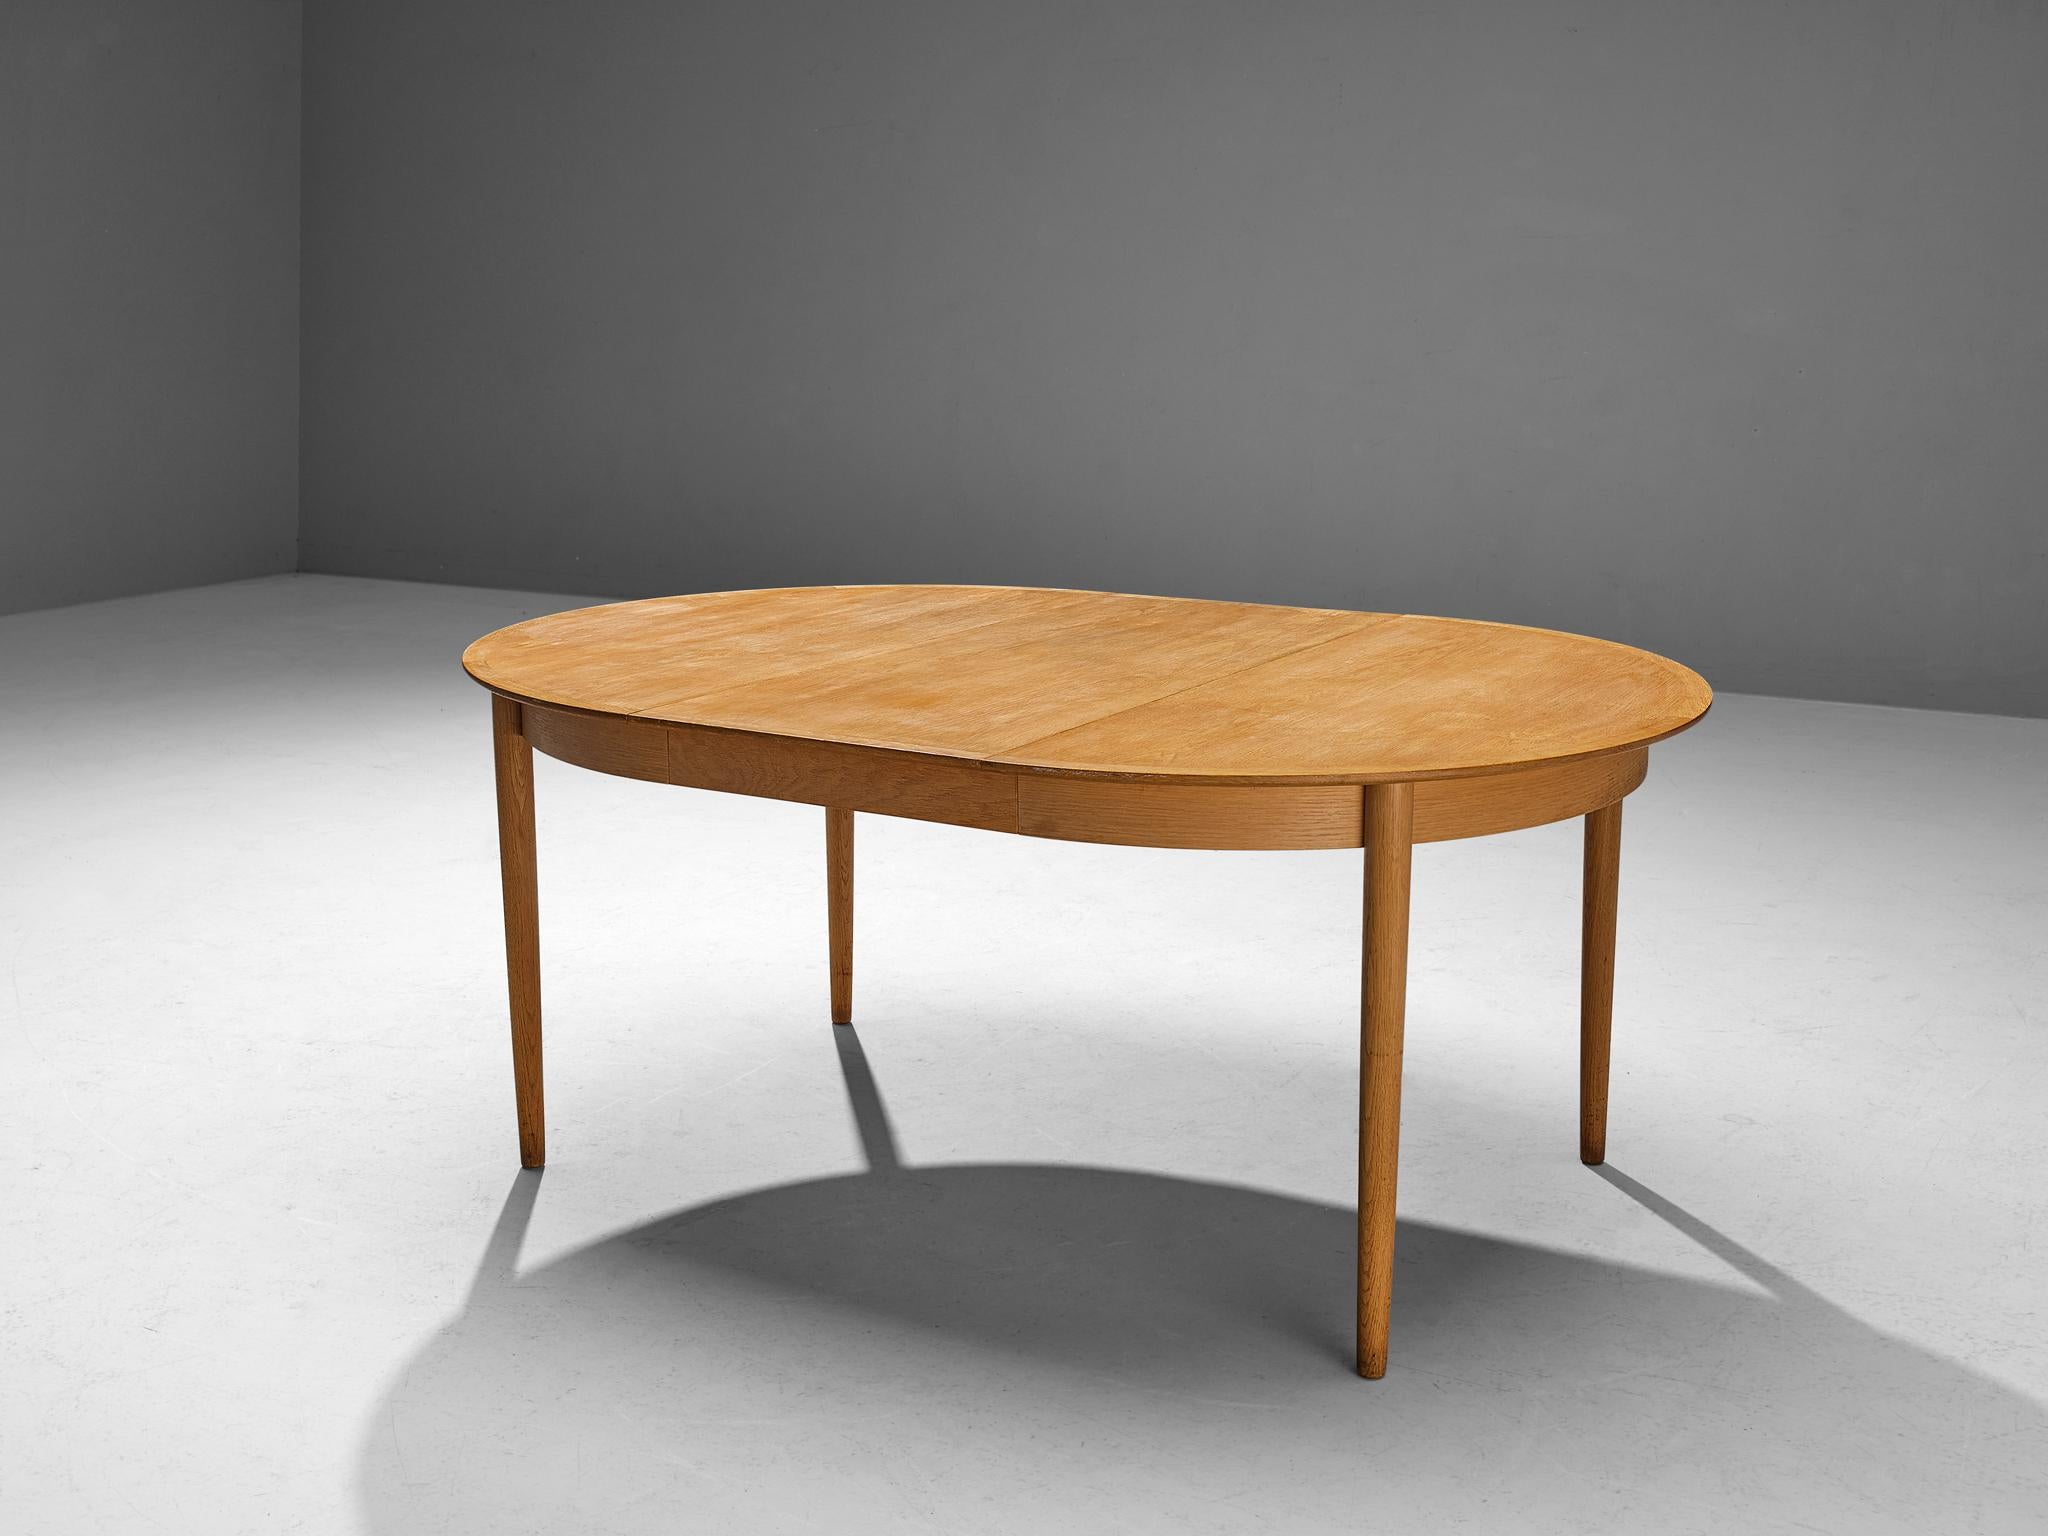 Dining table, Denmark, oak, 1960s

Lovely and elegant Danish extendable round dining table. The tabletop exists of two parts, where either one- or two additional extension leaves can be placed to create a larger table. The table is made in a very